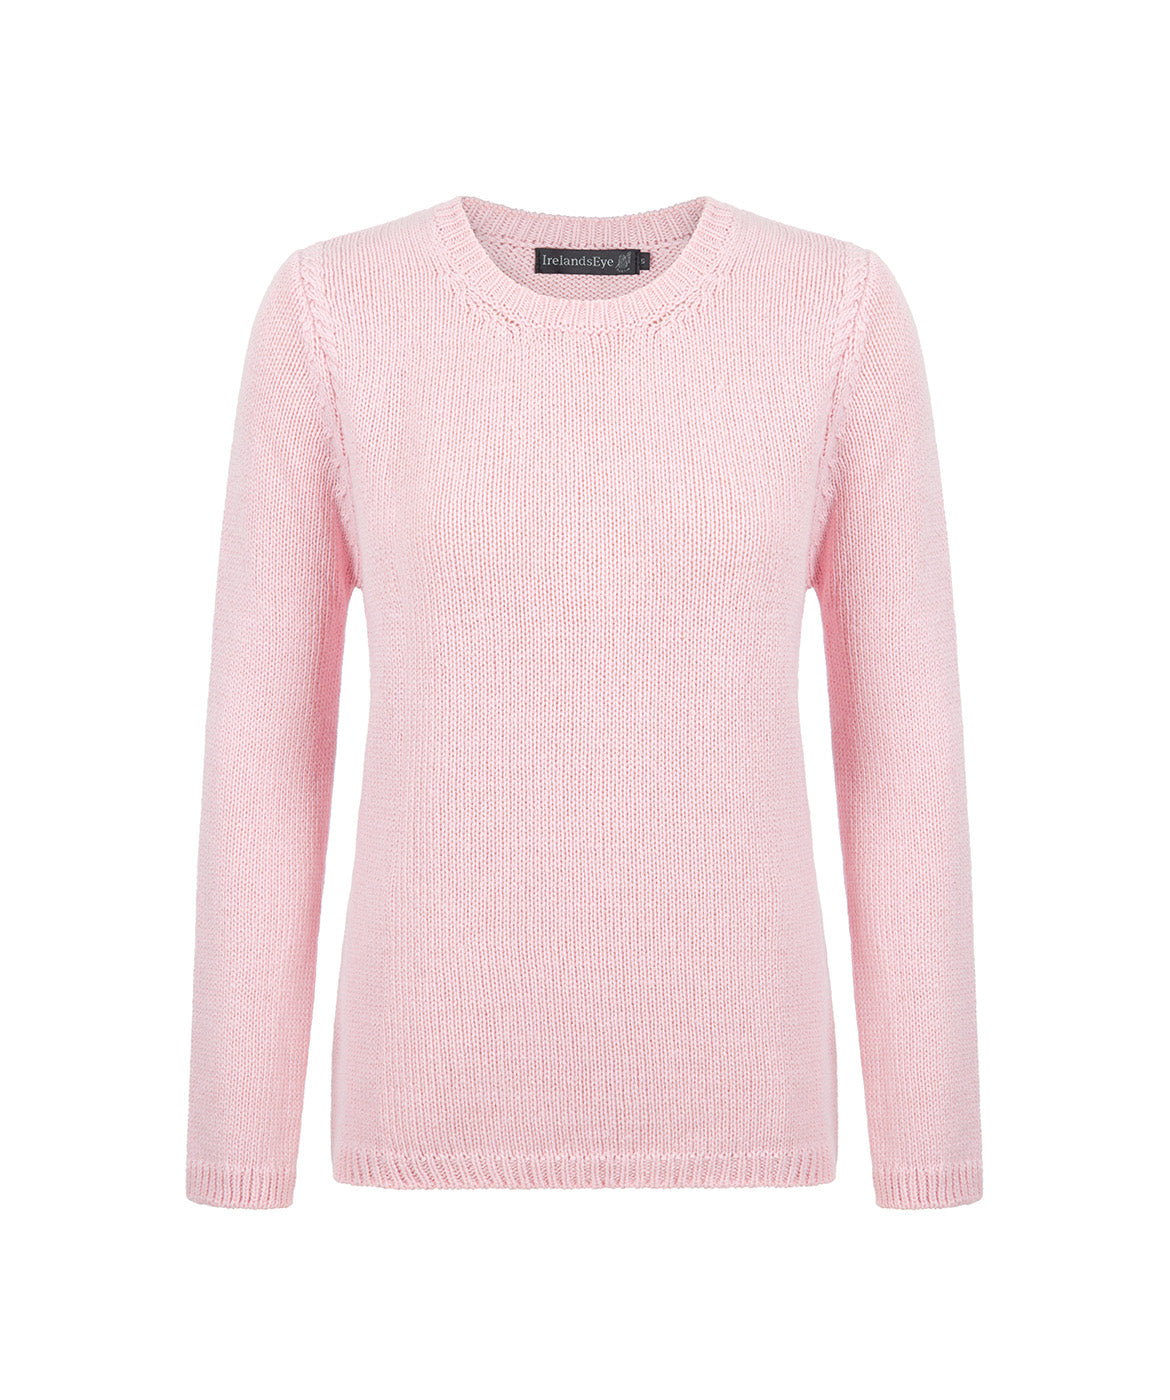 IrelandsEye Knitwear Womens Lahinch Jersey Cable Round Neck Sweater Cloud Pink